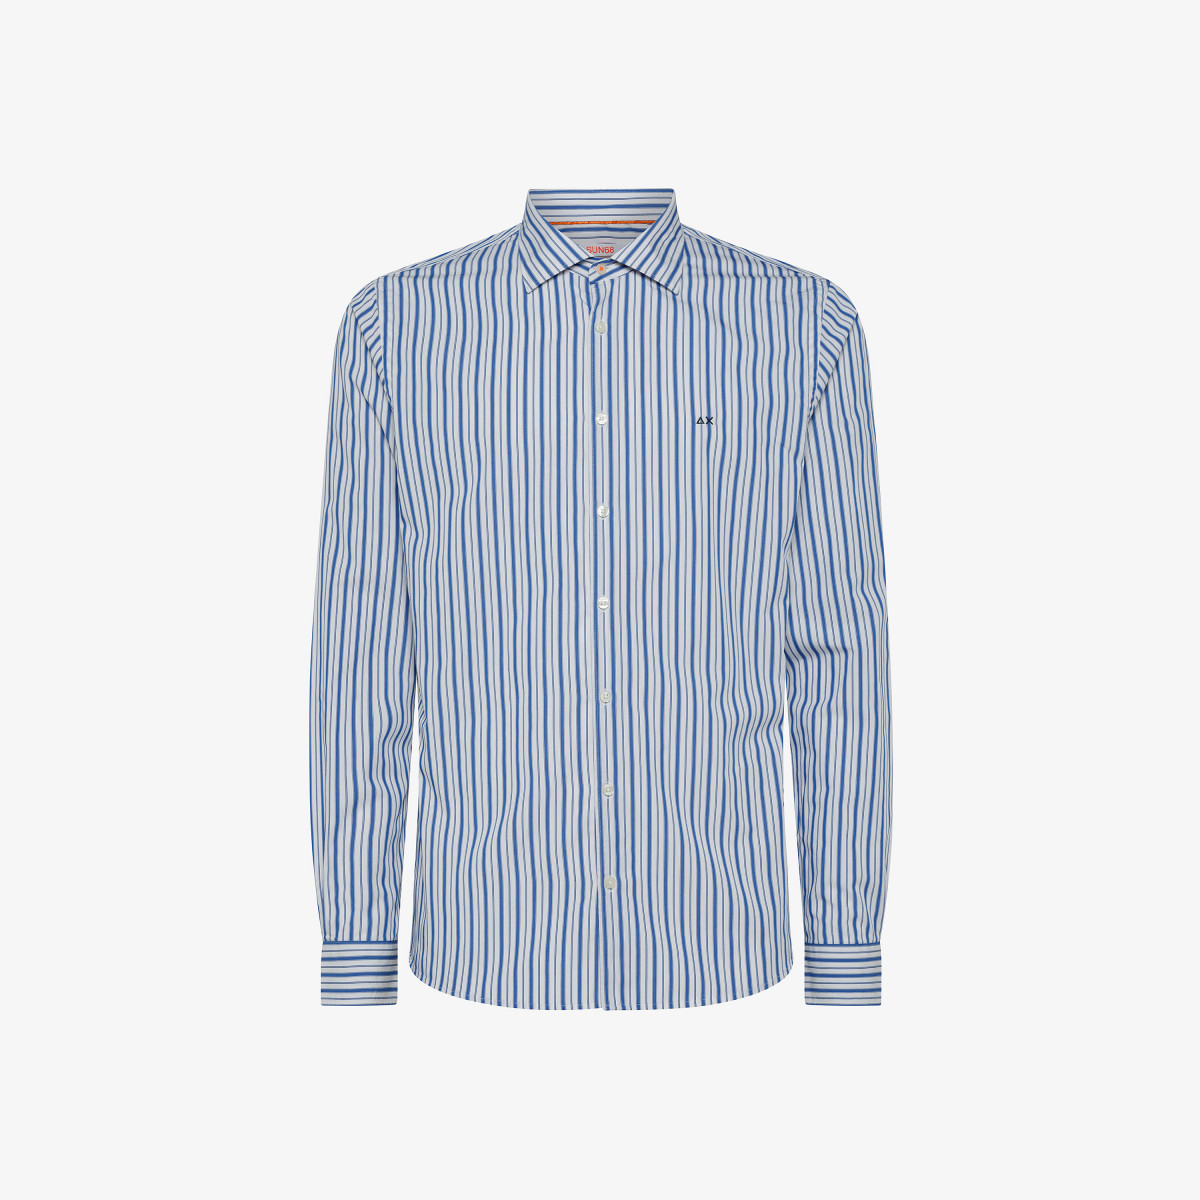 SHIRT CLASSIC STRIPES FRENCH COLLAR L/S OFF WHITE/NAVY BLUE